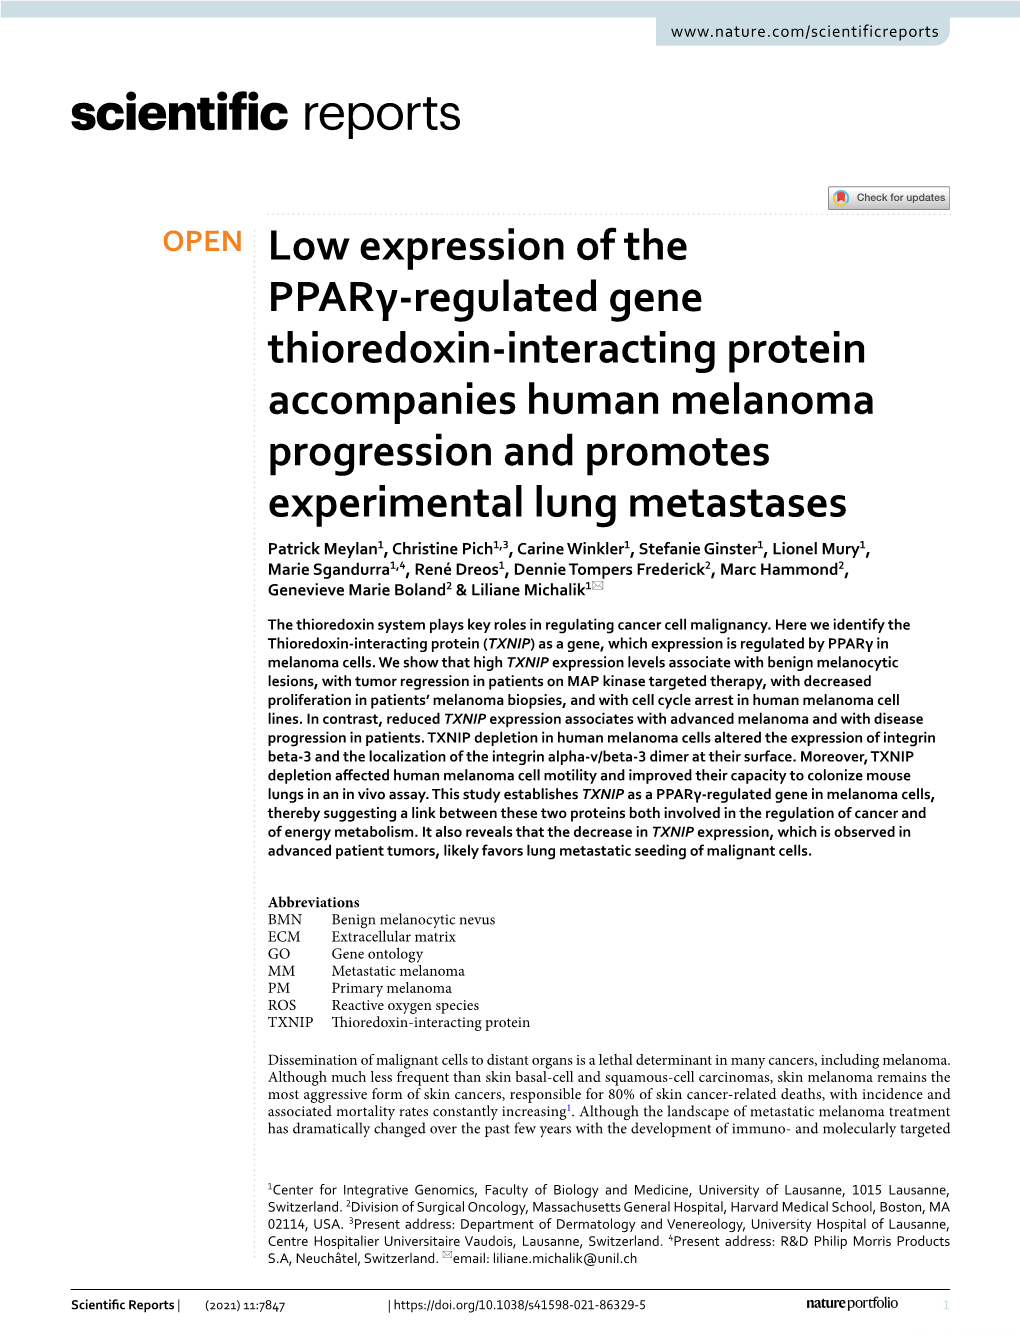 Low Expression of the Pparγ-Regulated Gene Thioredoxin